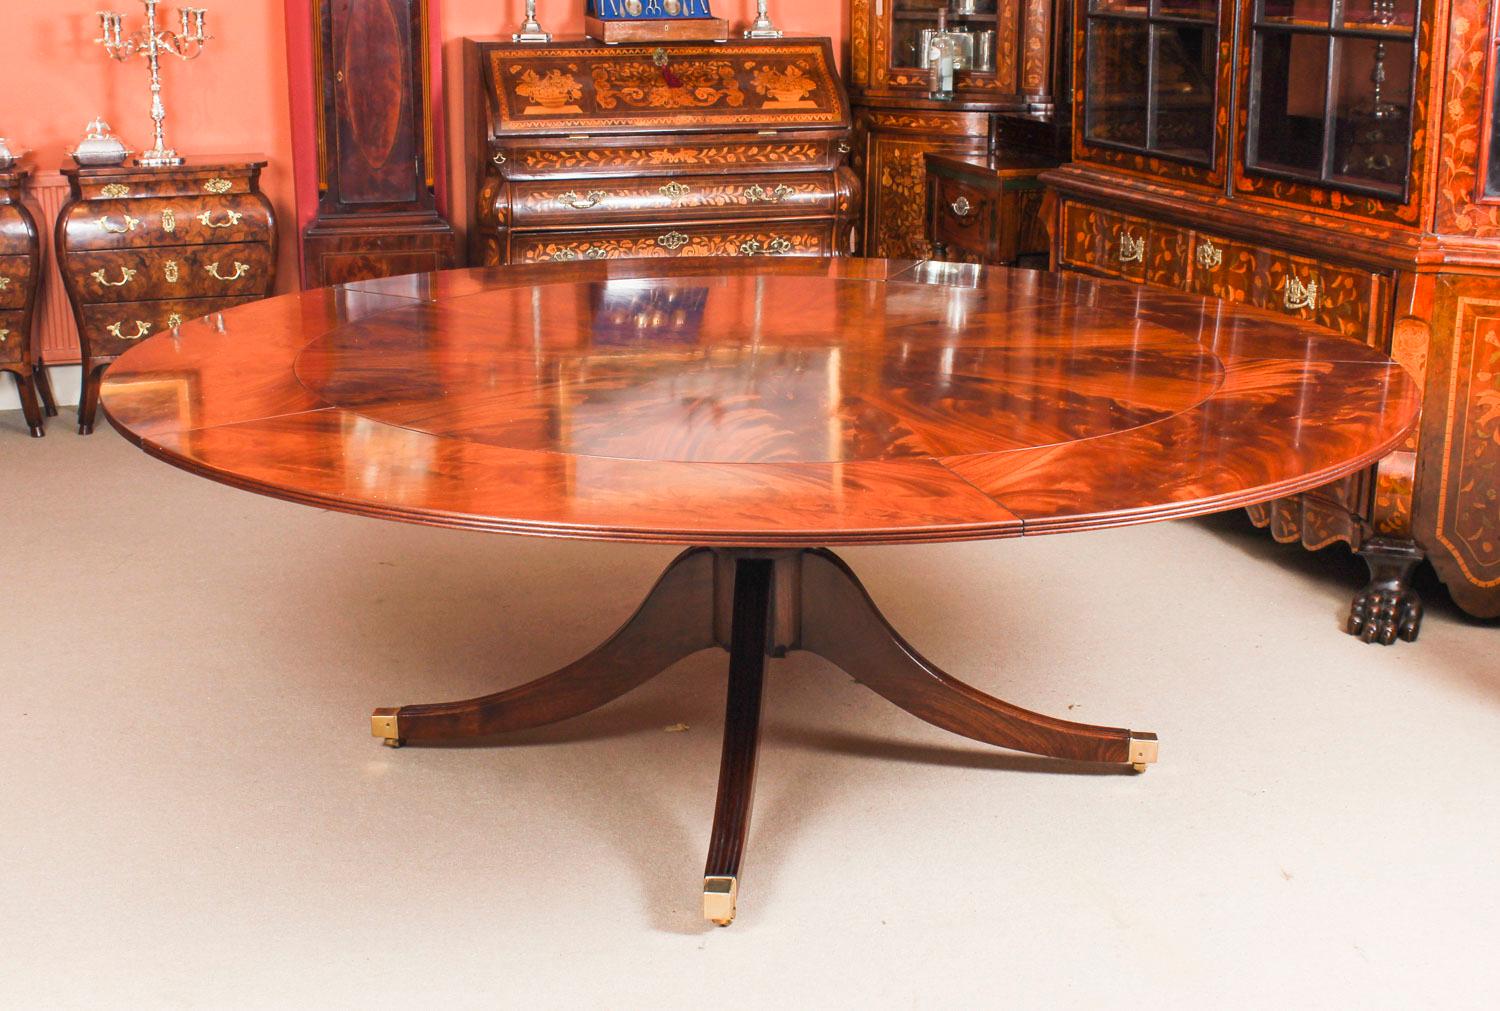 Regency Revival Vintage Flame Mahogany Jupe Dining Table and 10 Chairs, Mid-20th Century